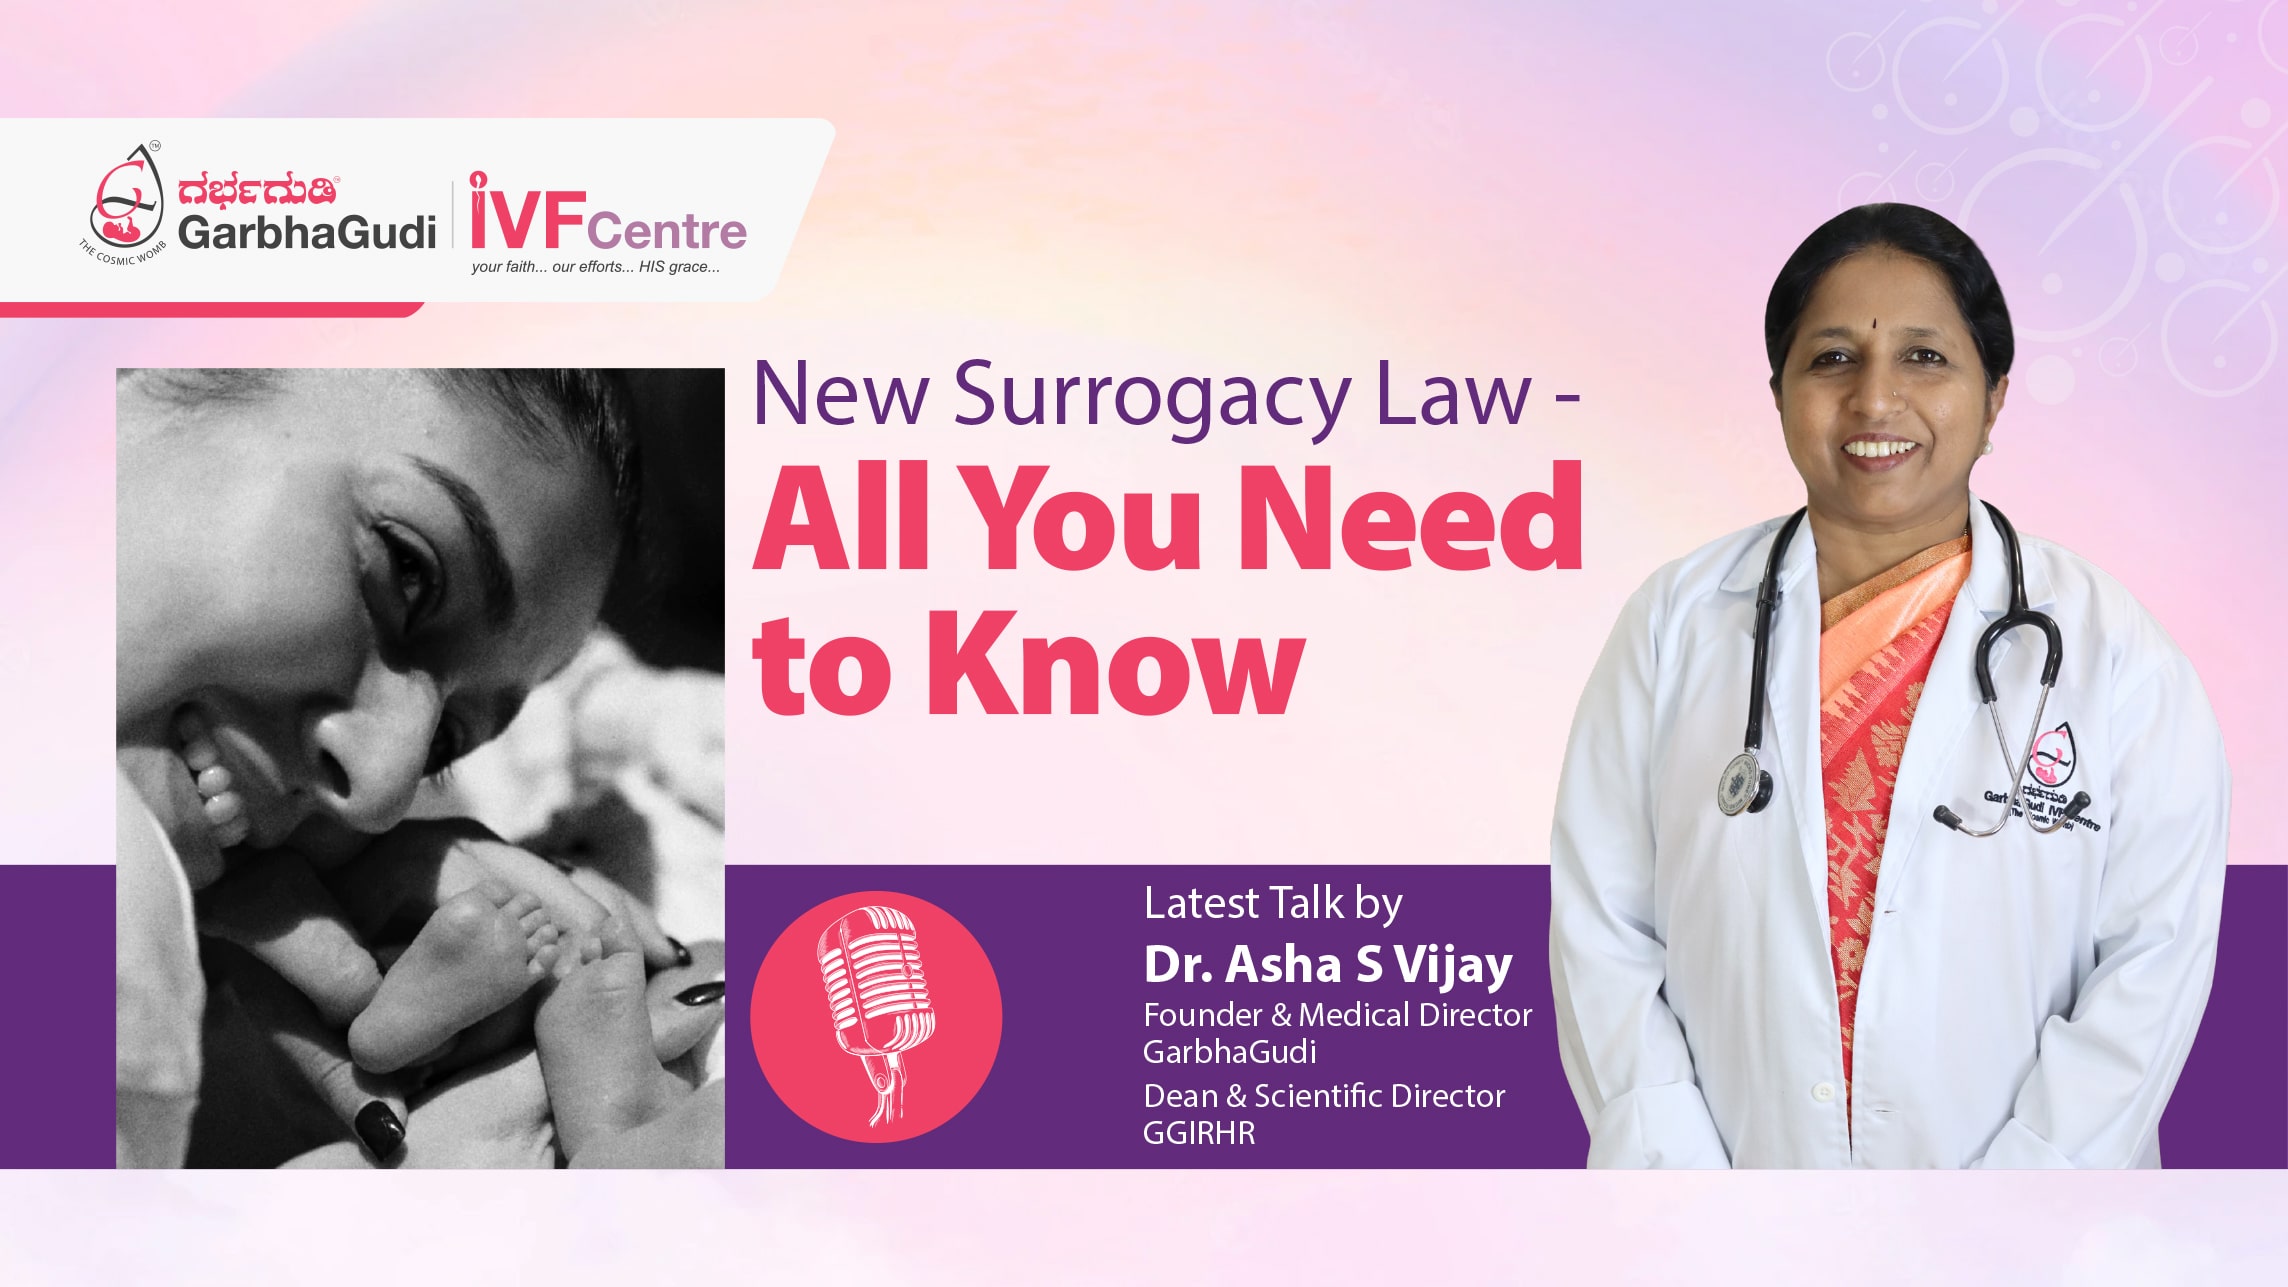 New Surrogacy Law - All You Need to Know 